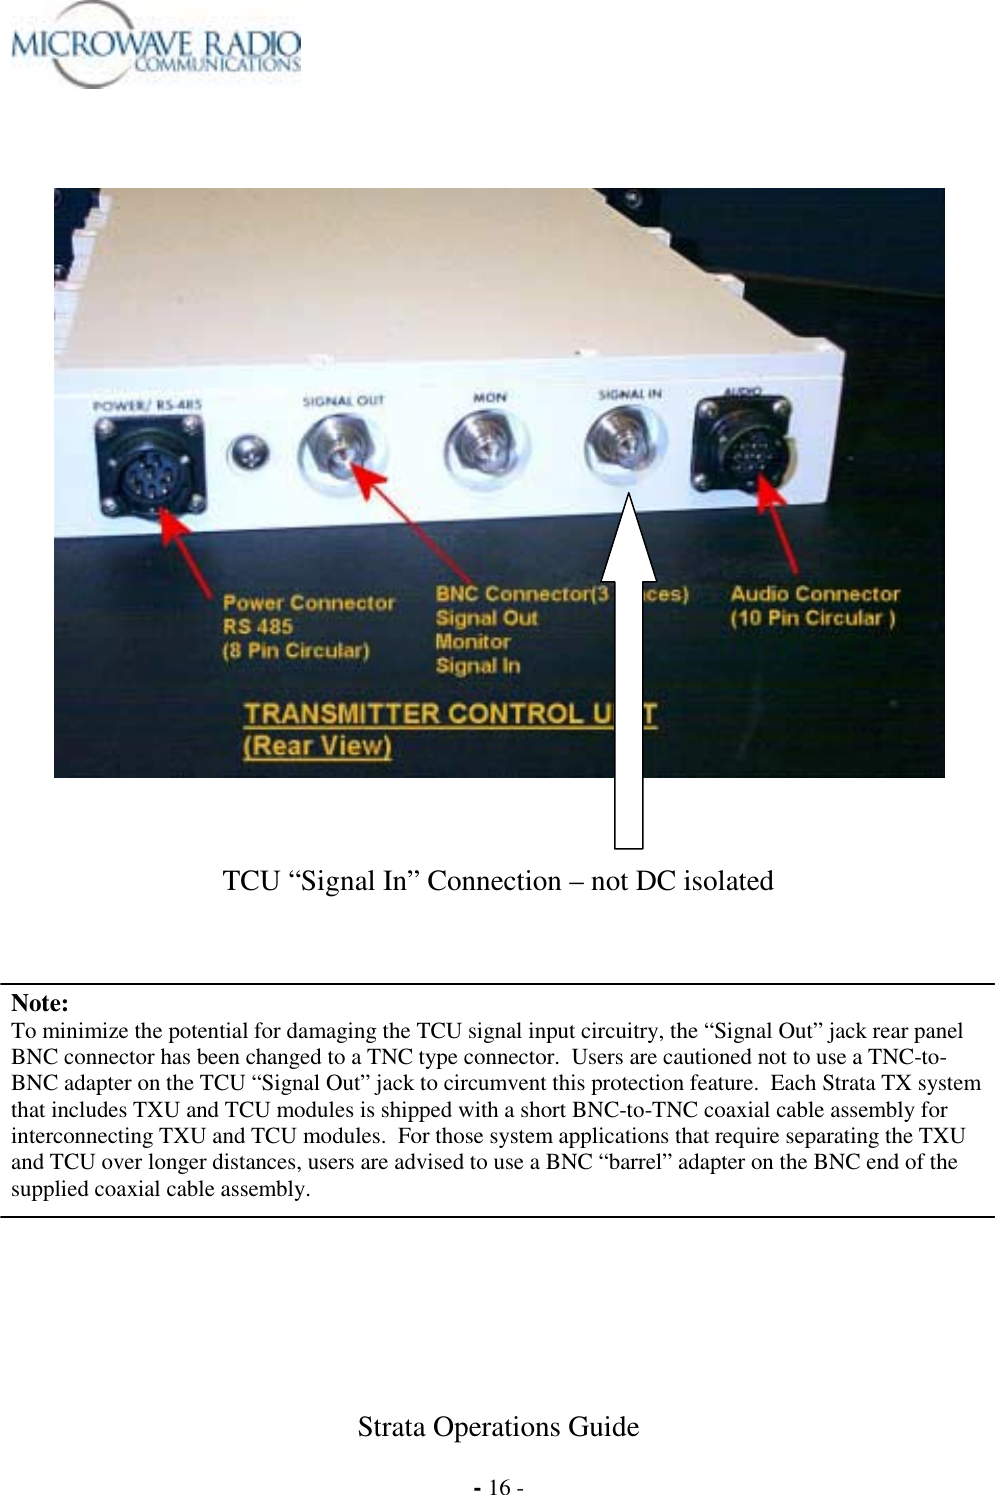  Strata Operations Guide  - 16 -        TCU “Signal In” Connection – not DC isolated    Note: To minimize the potential for damaging the TCU signal input circuitry, the “Signal Out” jack rear panel BNC connector has been changed to a TNC type connector.  Users are cautioned not to use a TNC-to-BNC adapter on the TCU “Signal Out” jack to circumvent this protection feature.  Each Strata TX system that includes TXU and TCU modules is shipped with a short BNC-to-TNC coaxial cable assembly for interconnecting TXU and TCU modules.  For those system applications that require separating the TXU and TCU over longer distances, users are advised to use a BNC “barrel” adapter on the BNC end of the supplied coaxial cable assembly.   